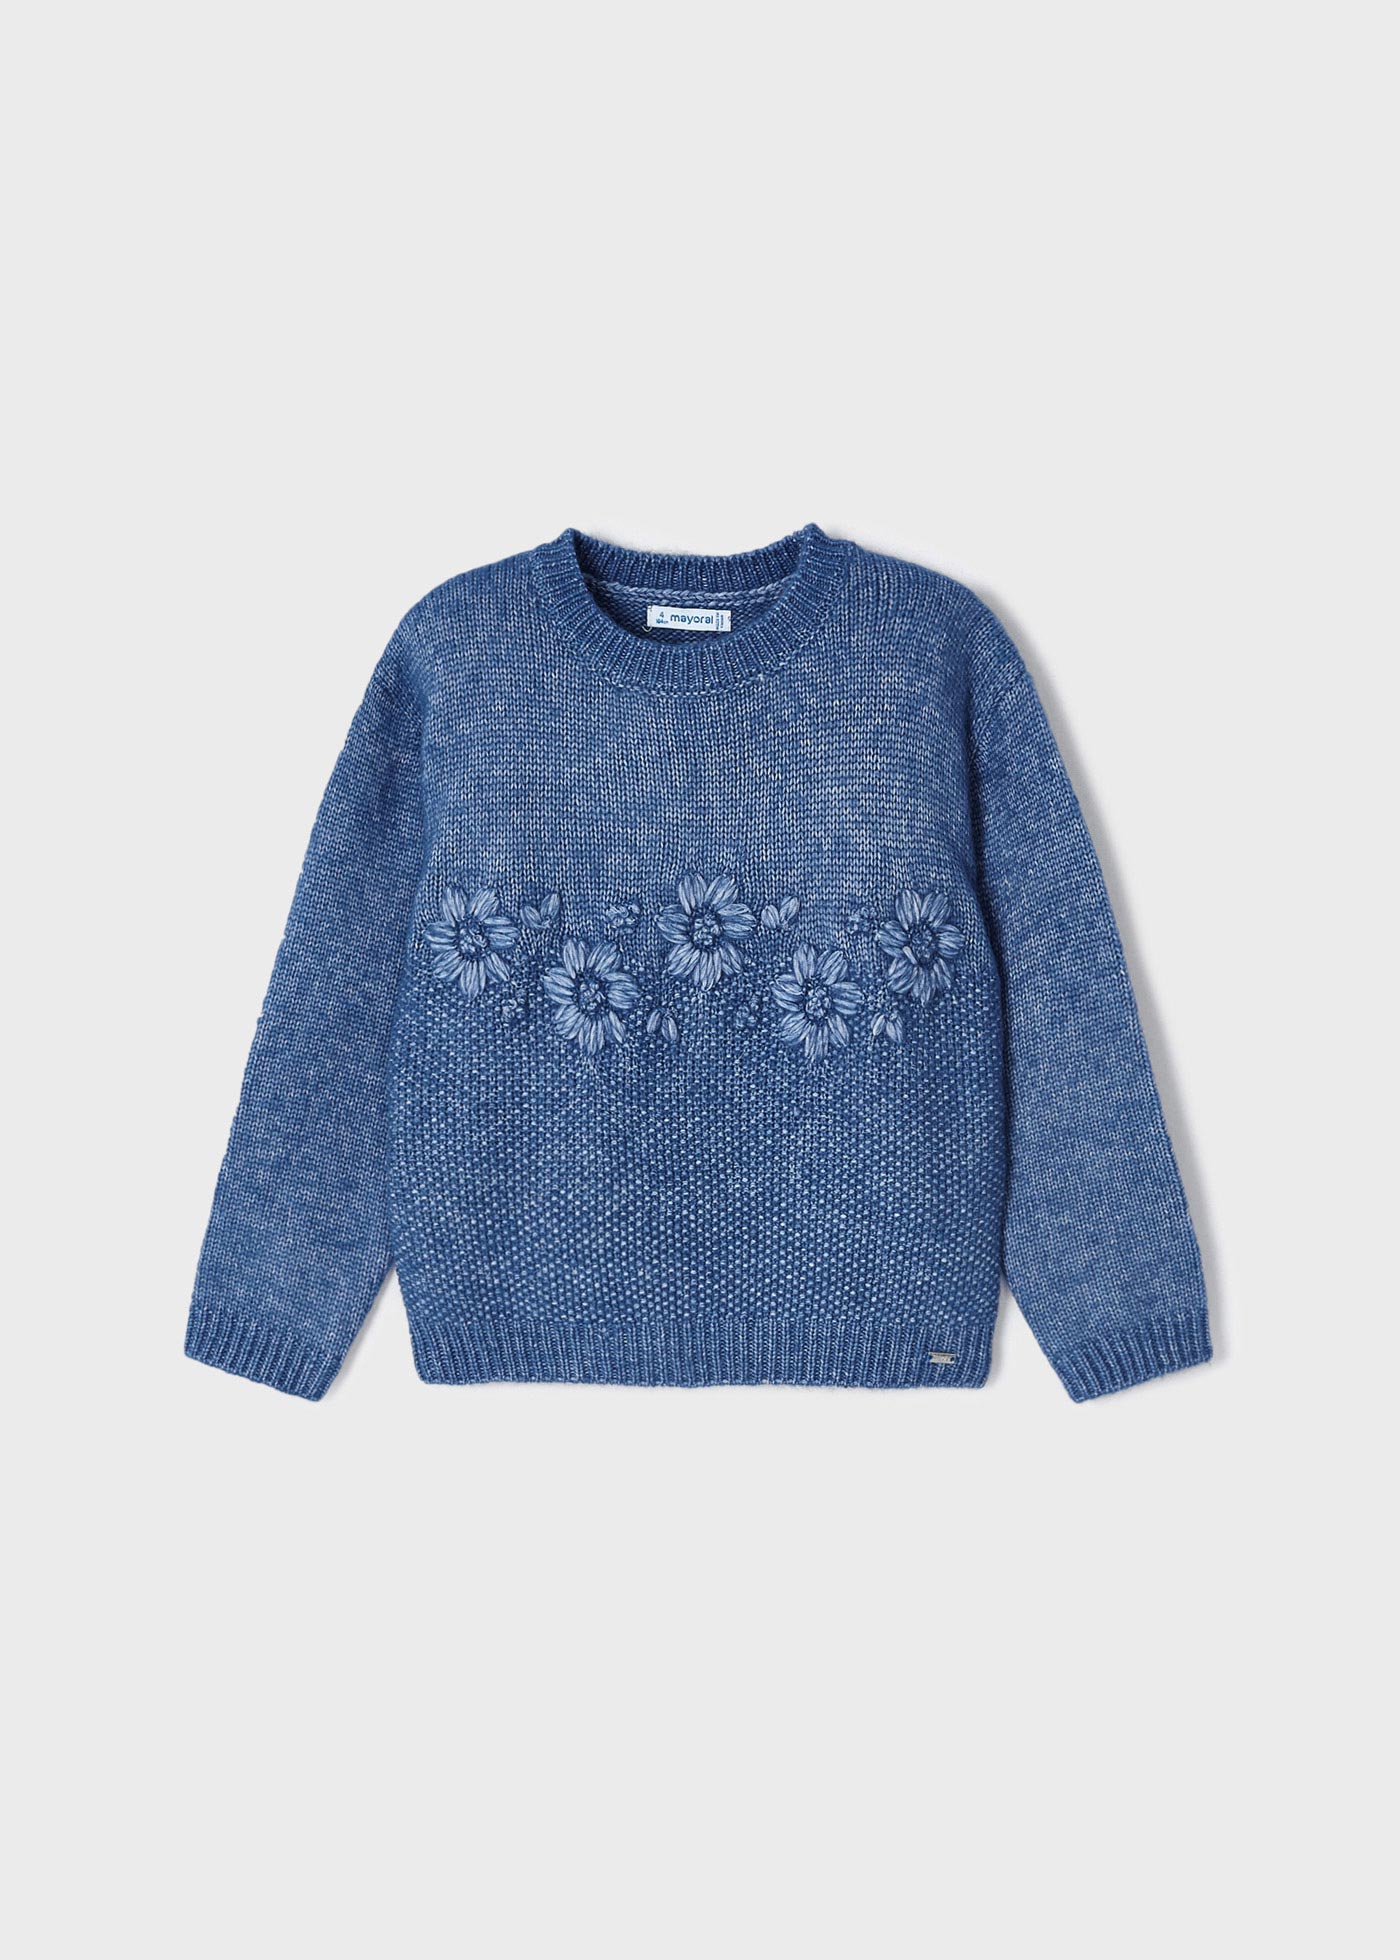 Floral embroidery knit sweater girl | Mayoral